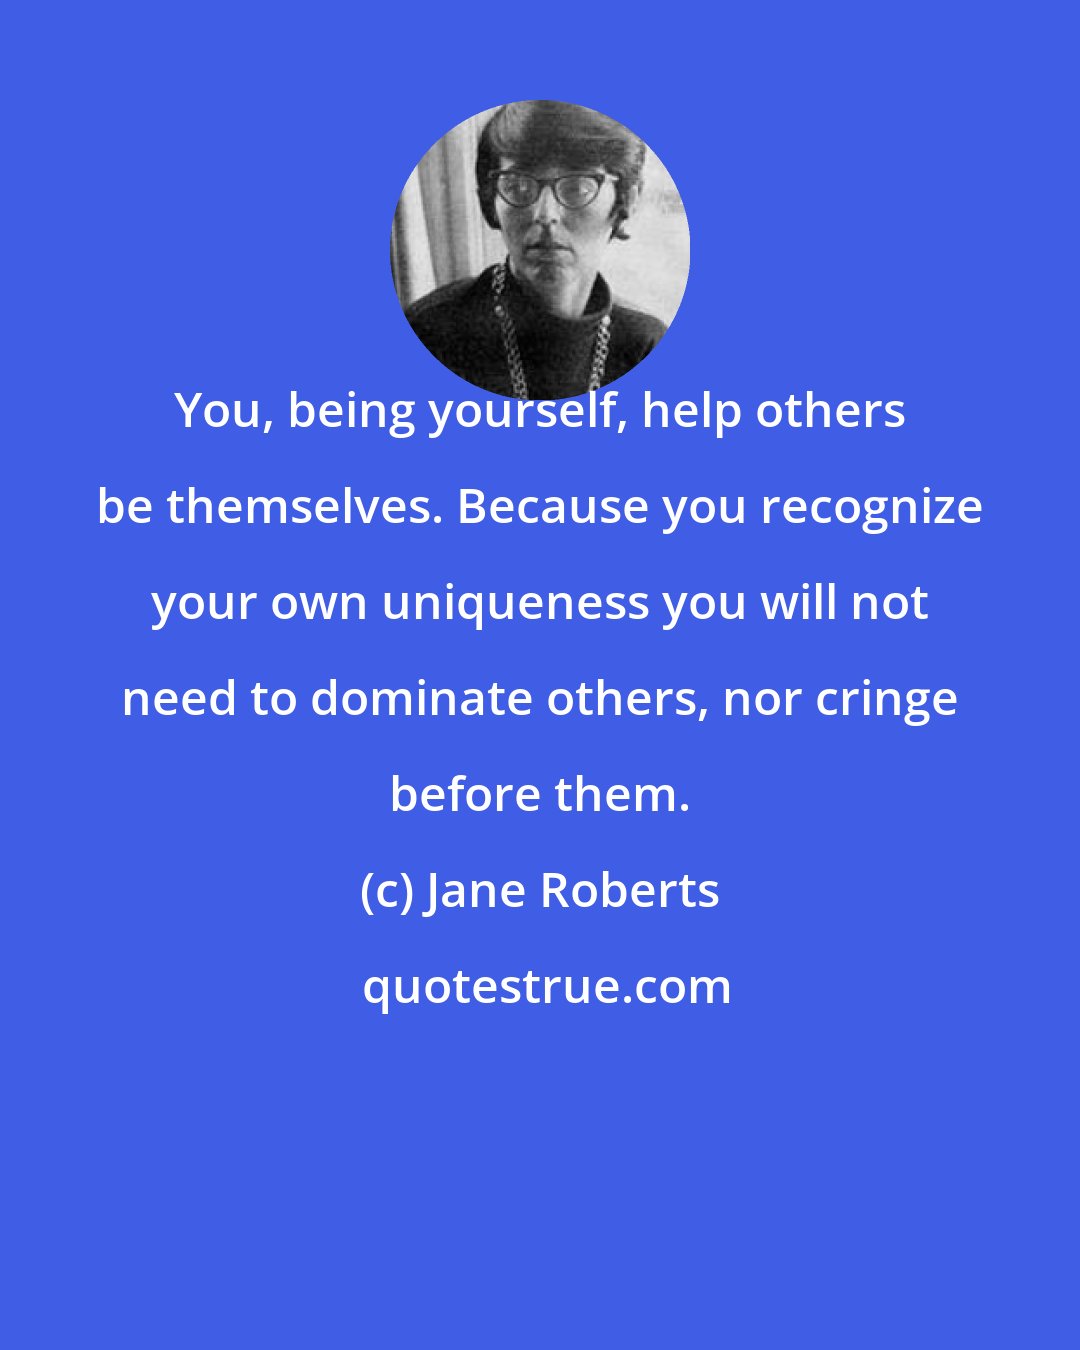 Jane Roberts: You, being yourself, help others be themselves. Because you recognize your own uniqueness you will not need to dominate others, nor cringe before them.